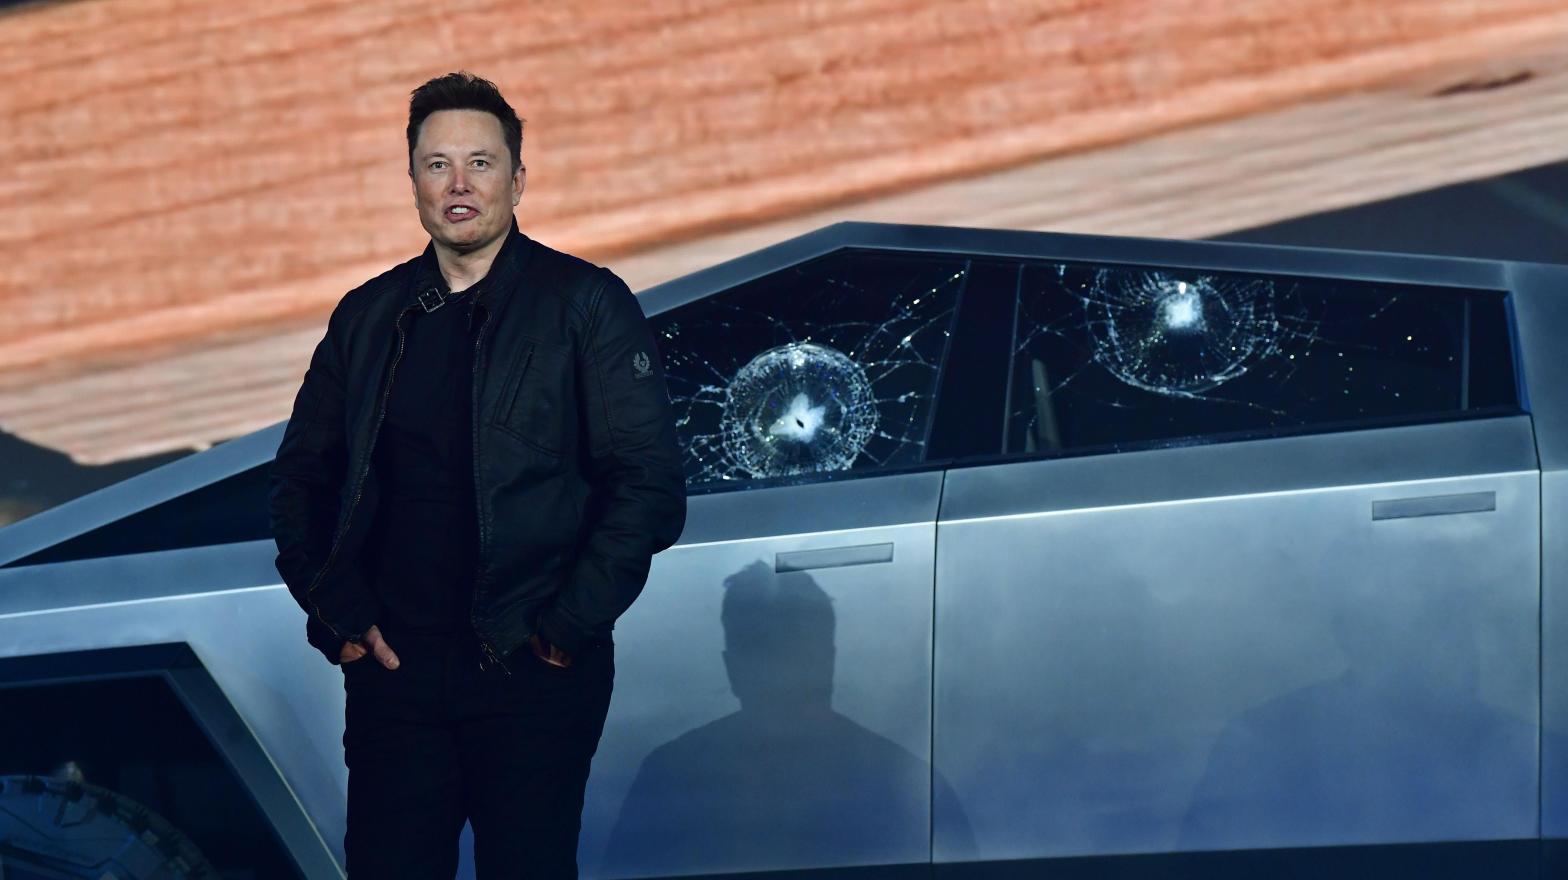 Tesla co-founder and CEO Elon Musk stands in front of the shattered windows of the newly unveiled all-electric battery-powered Tesla's Cybertruck (Photo: Frederic J. Brown, Getty Images)